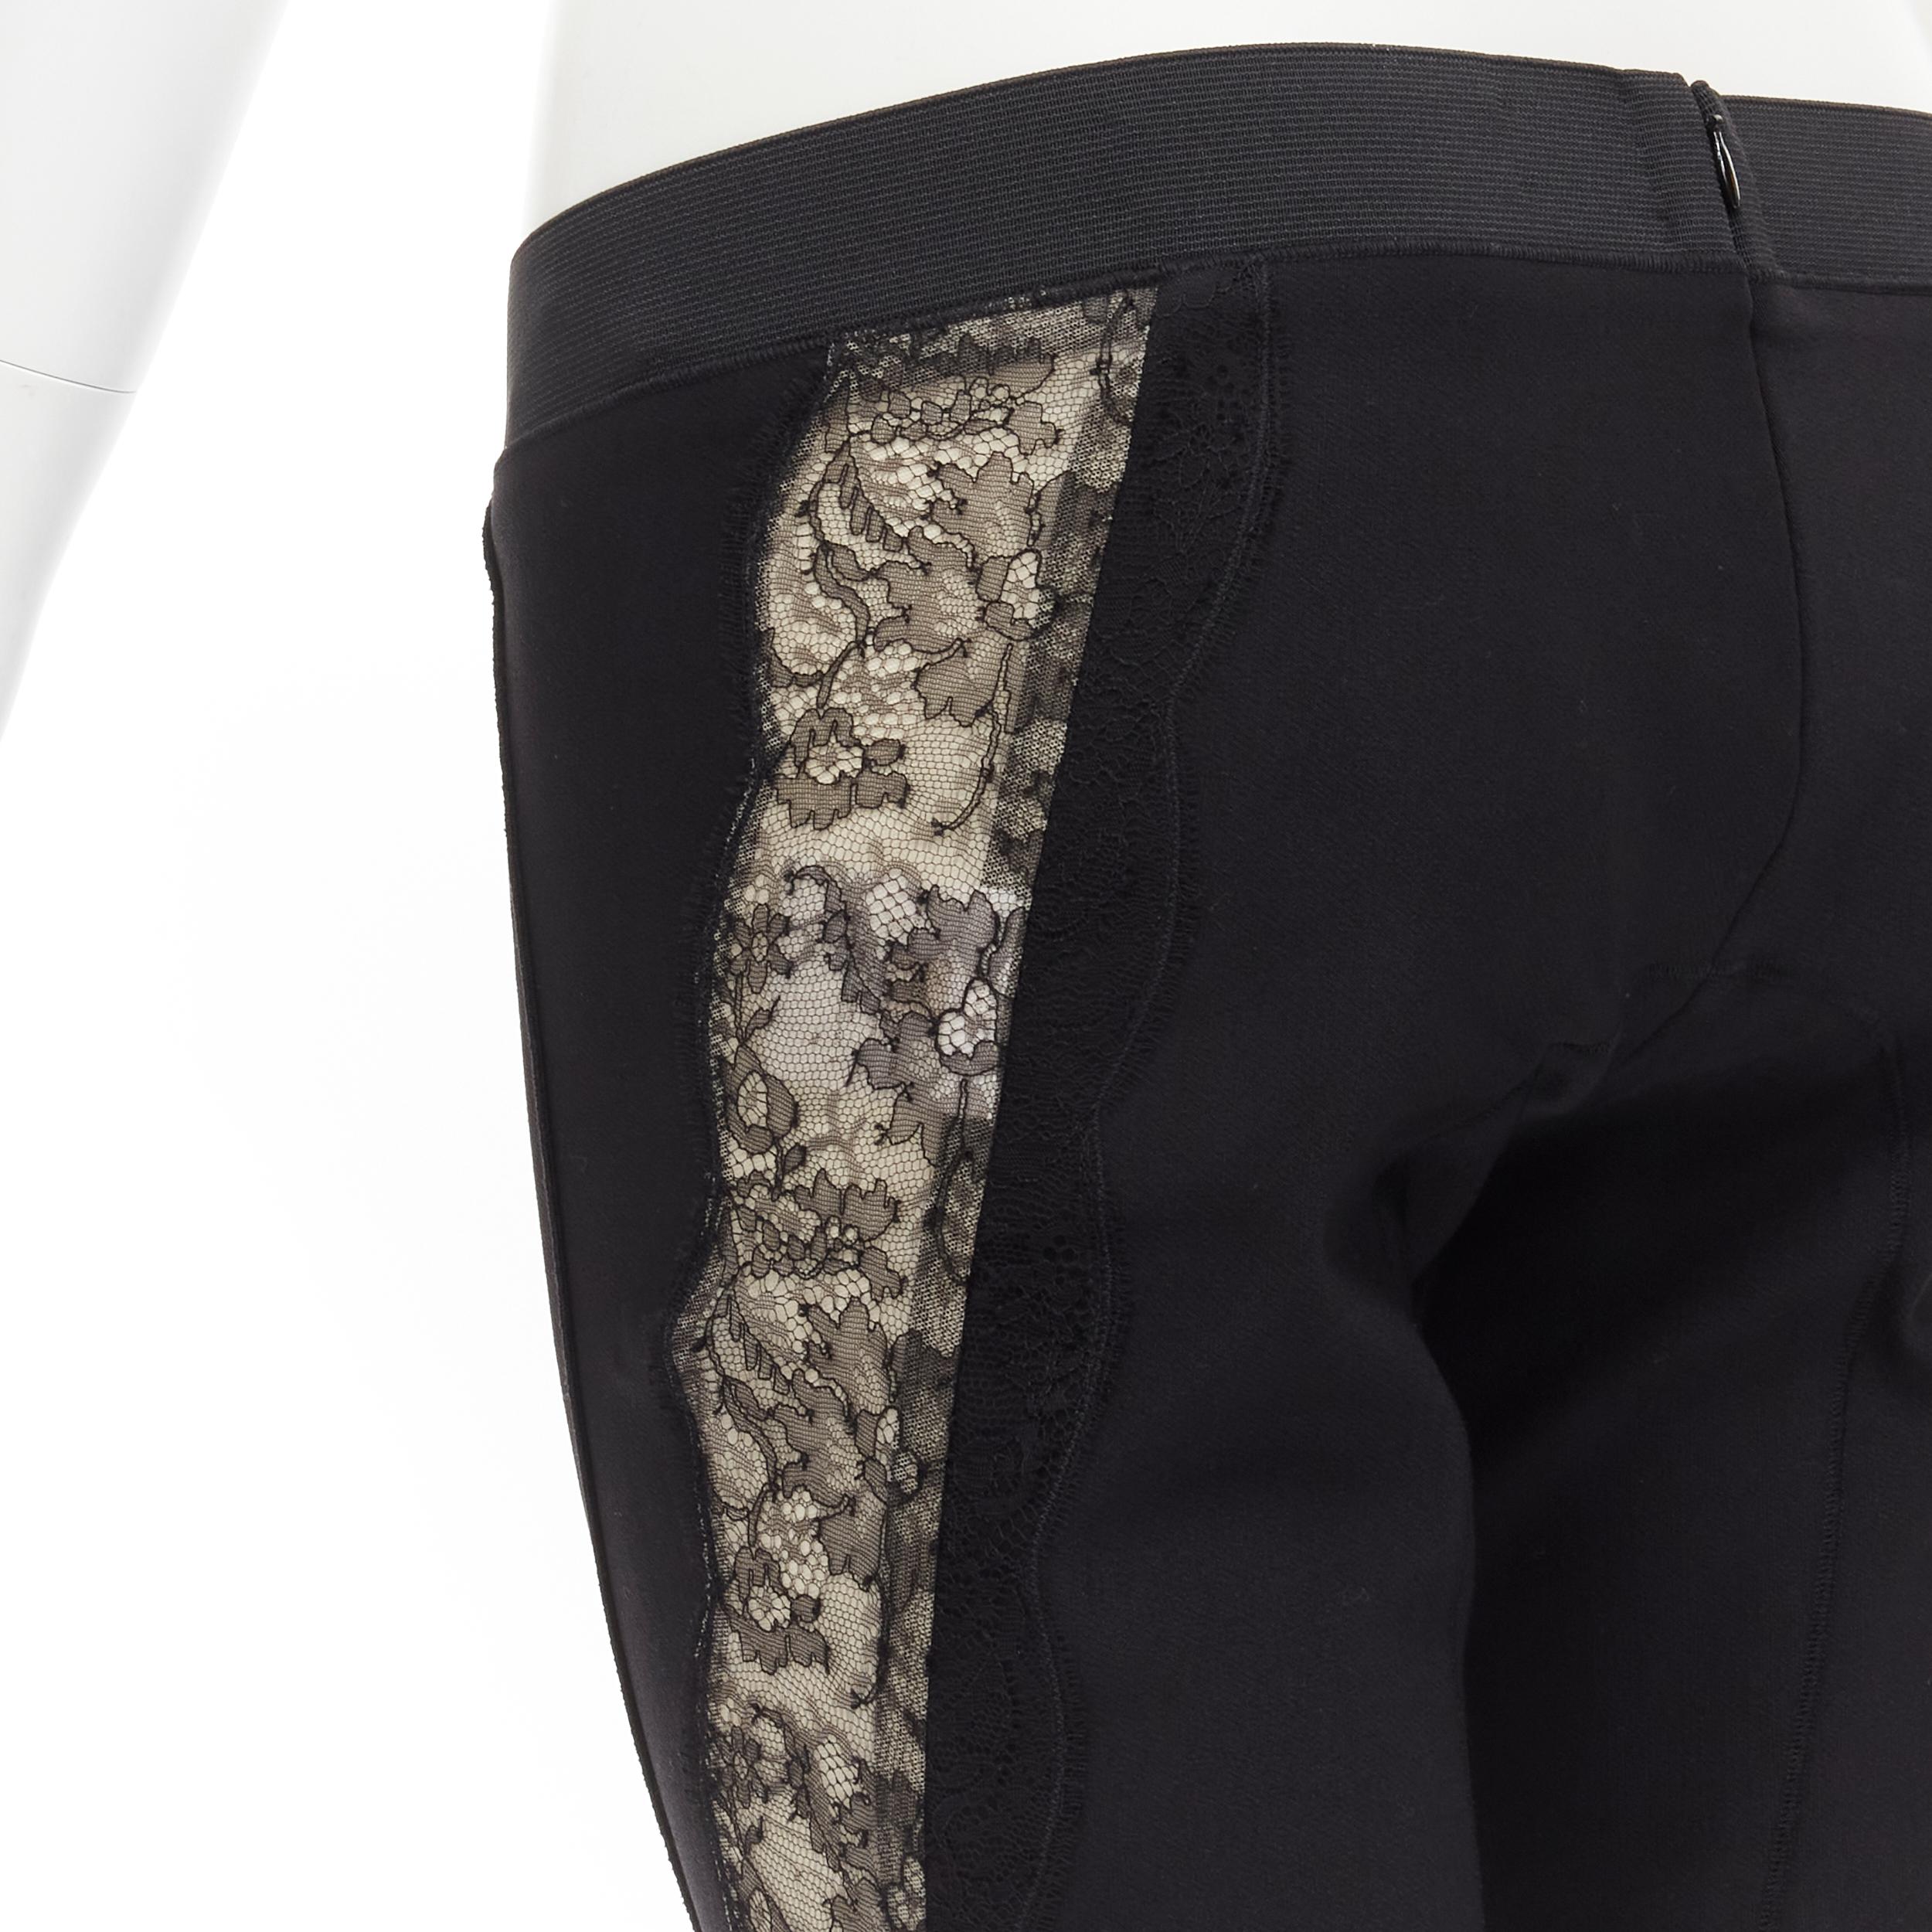 STELLA MCCARTNEY black contour seam sheer lace side stretch legging pants IT38 S 
Reference: MELK/A00089 
Brand: Stella McCartney 
Material: Wool 
Color: Black 
Pattern: Solid 
Closure: Zip 
Extra Detail: Contour piping. Sheer lace panel on sides.